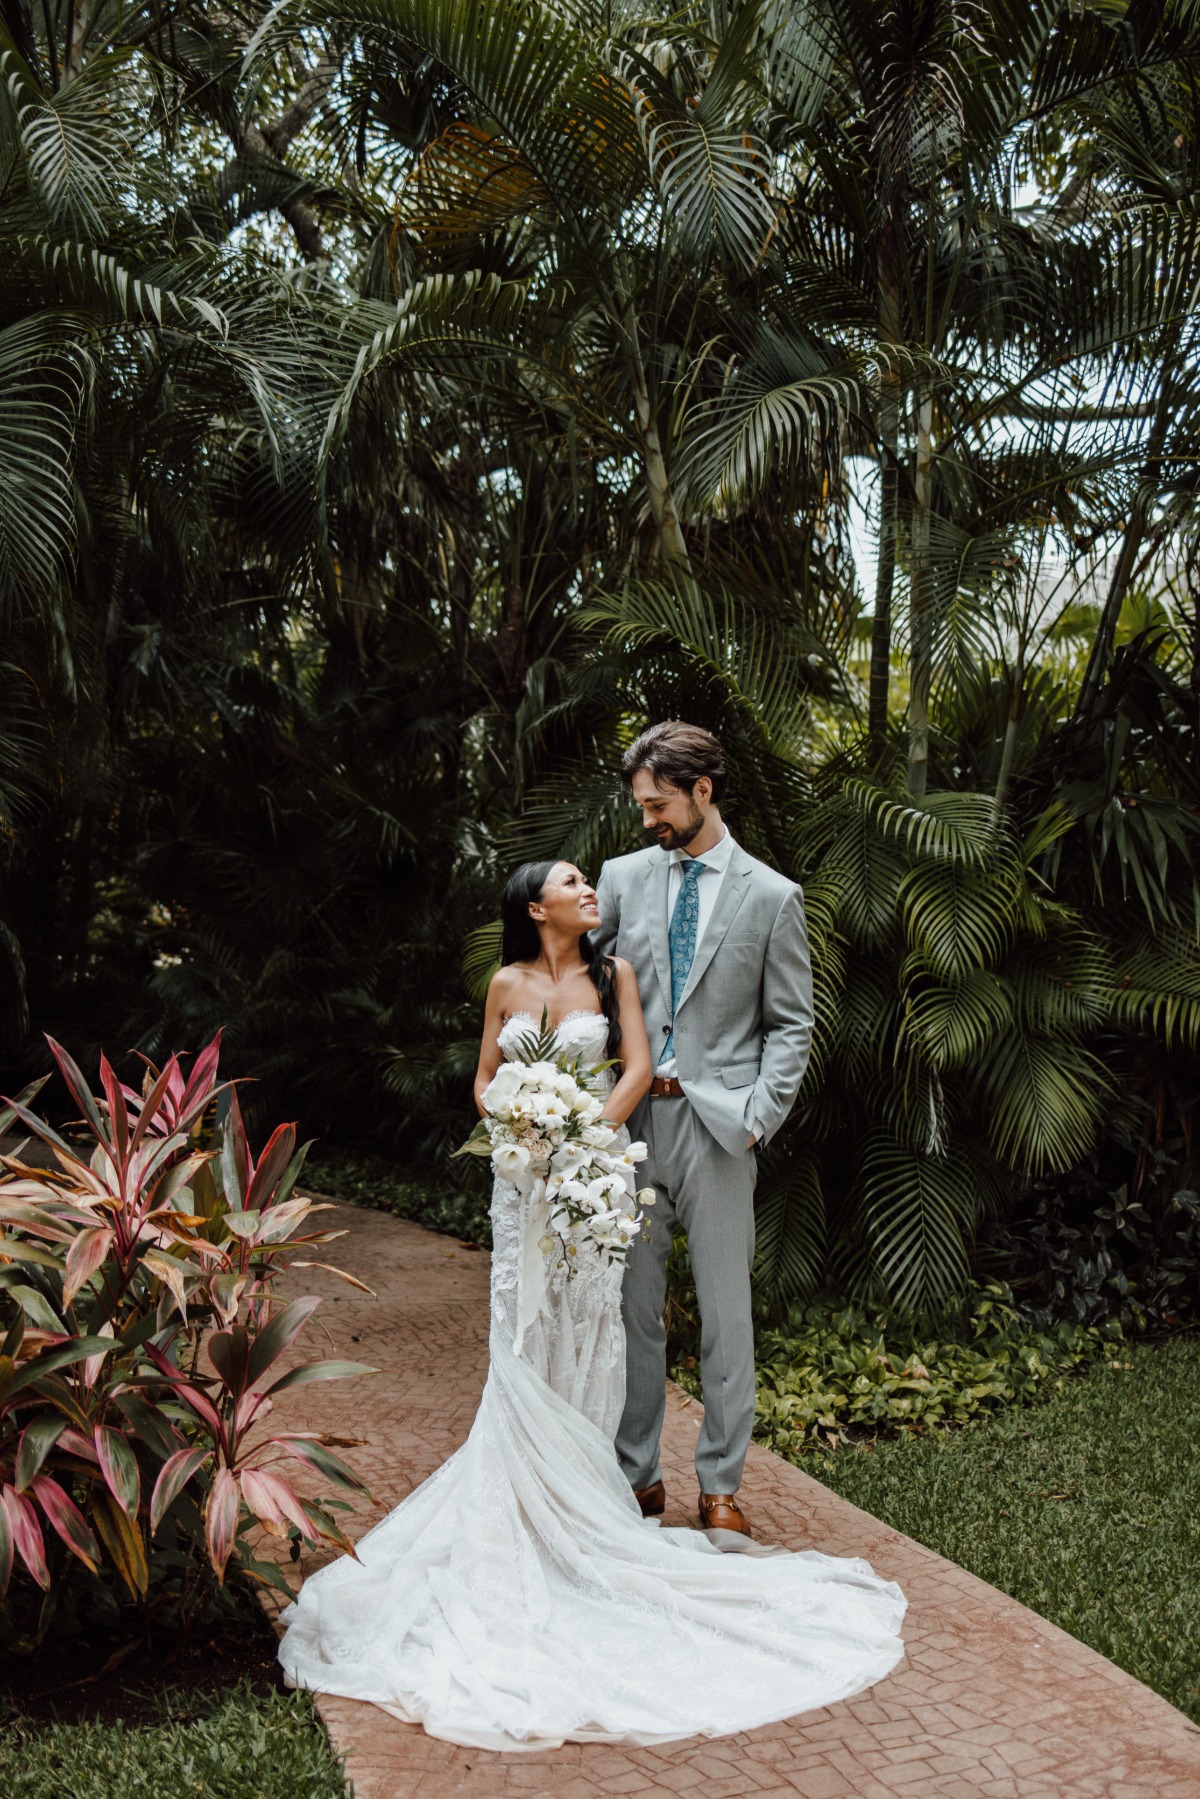 Bride and groom in front of tropical foliage holding white waterfall bouquet of white flowers